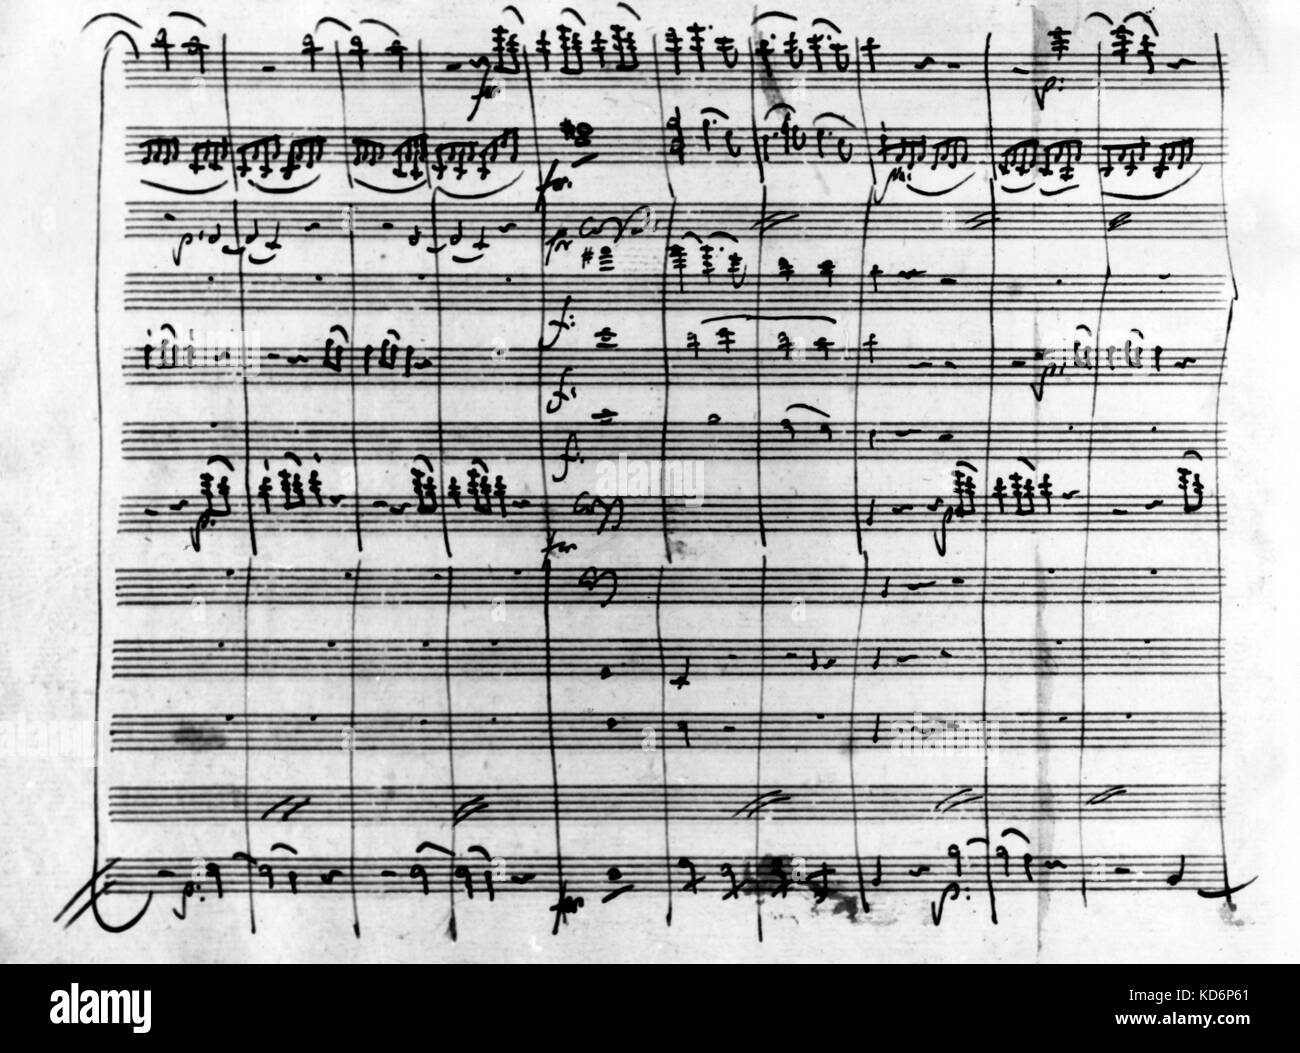 Wolfgang Amadeus Mozart 's Symphony No. 40, Molto Allegro in G moll, KV 550, bars 73-82. Score page in the composer's handwriting. Austrian composer. 1756-1791 Stock Photo